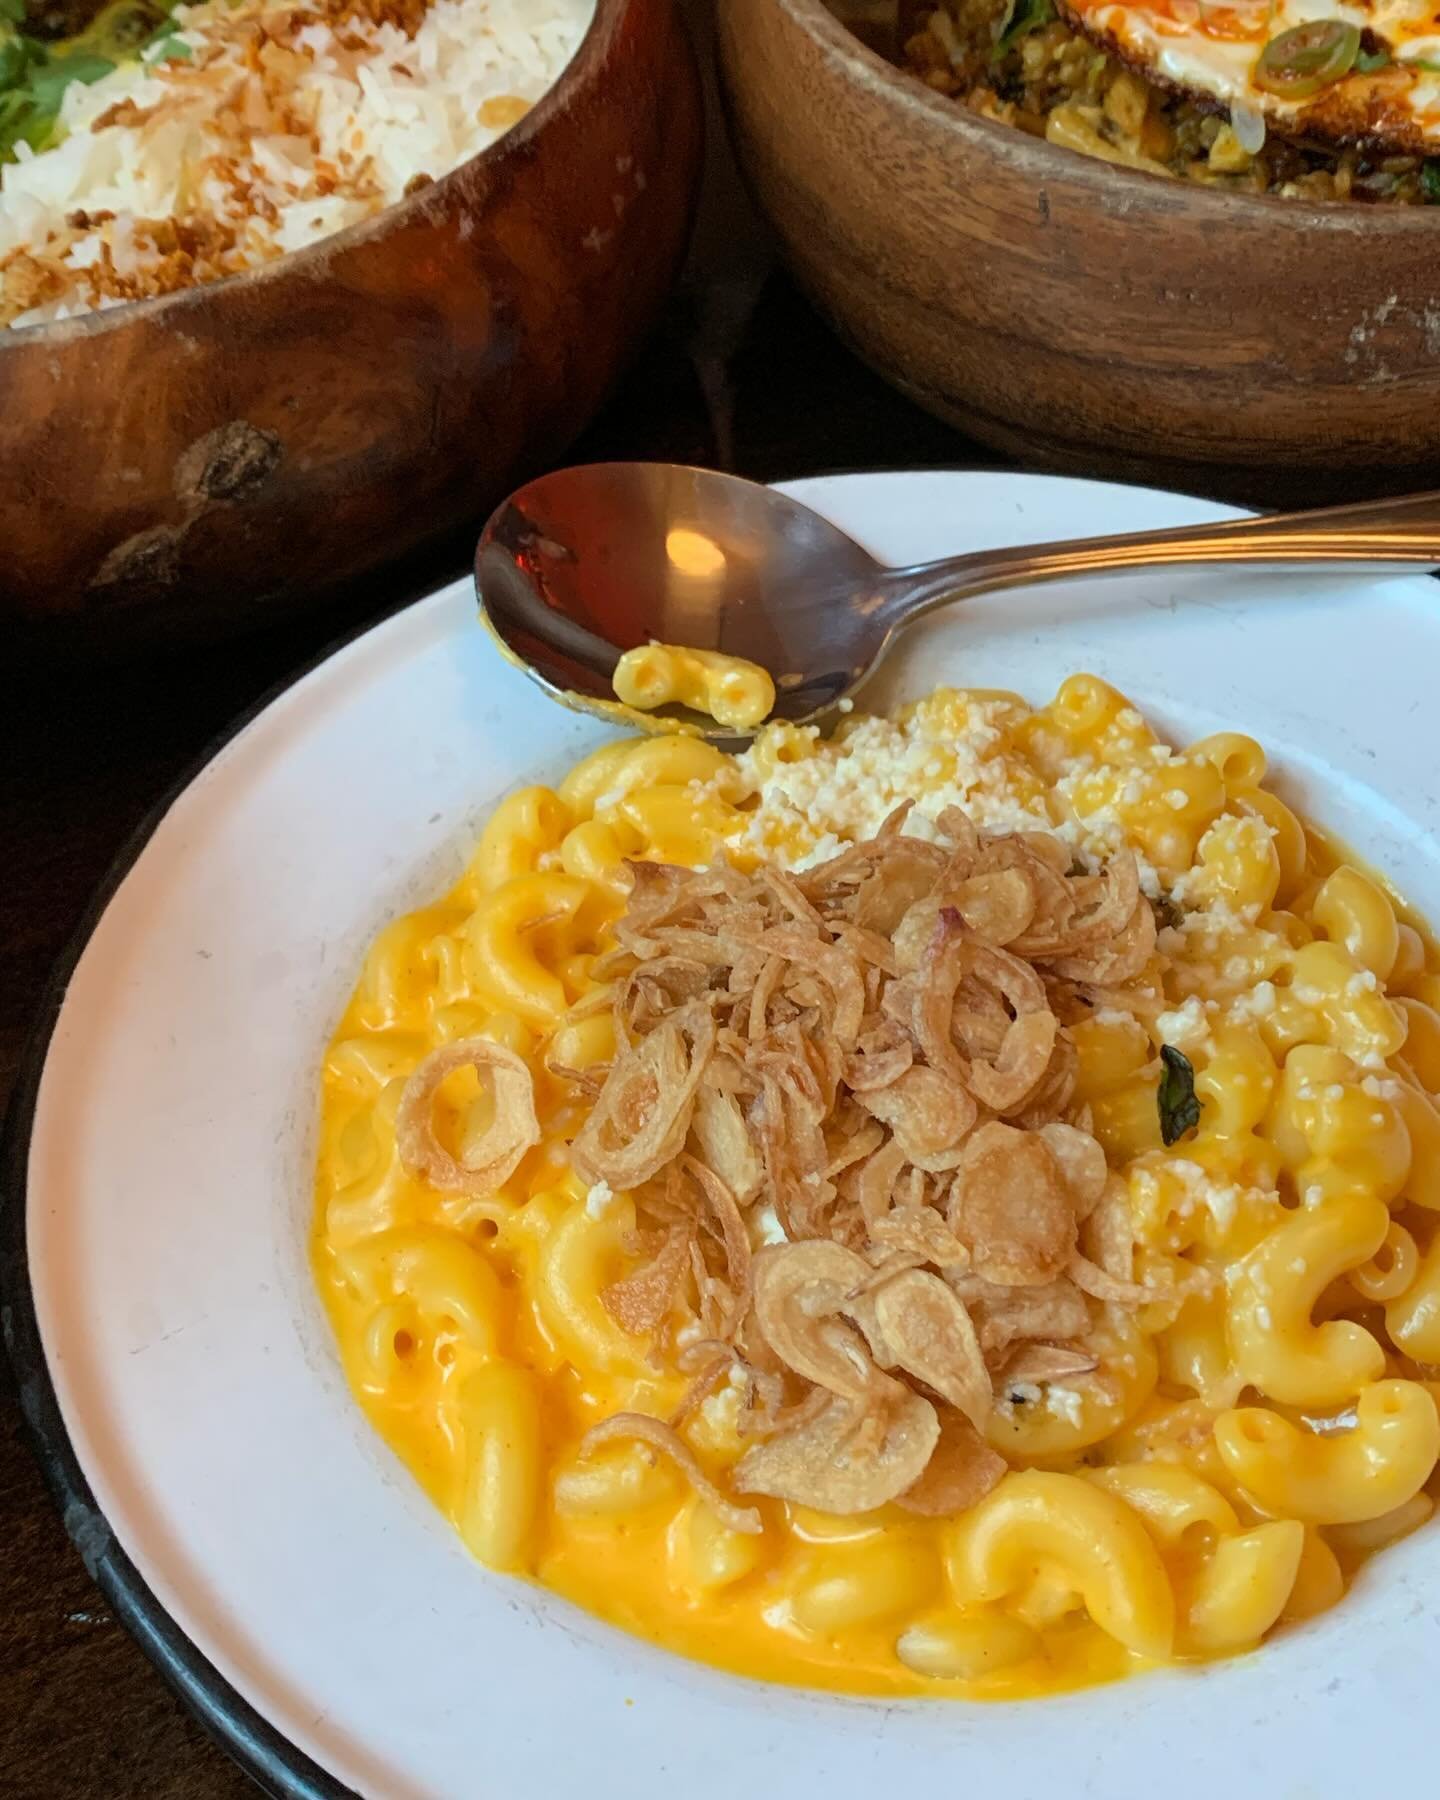 CRAFT DINNER 🧀 
Elbow macaroni, aged cheddar cheese sauce, salsa verde, fried shallots, cotija cheese 🤤
#chadwicksTO